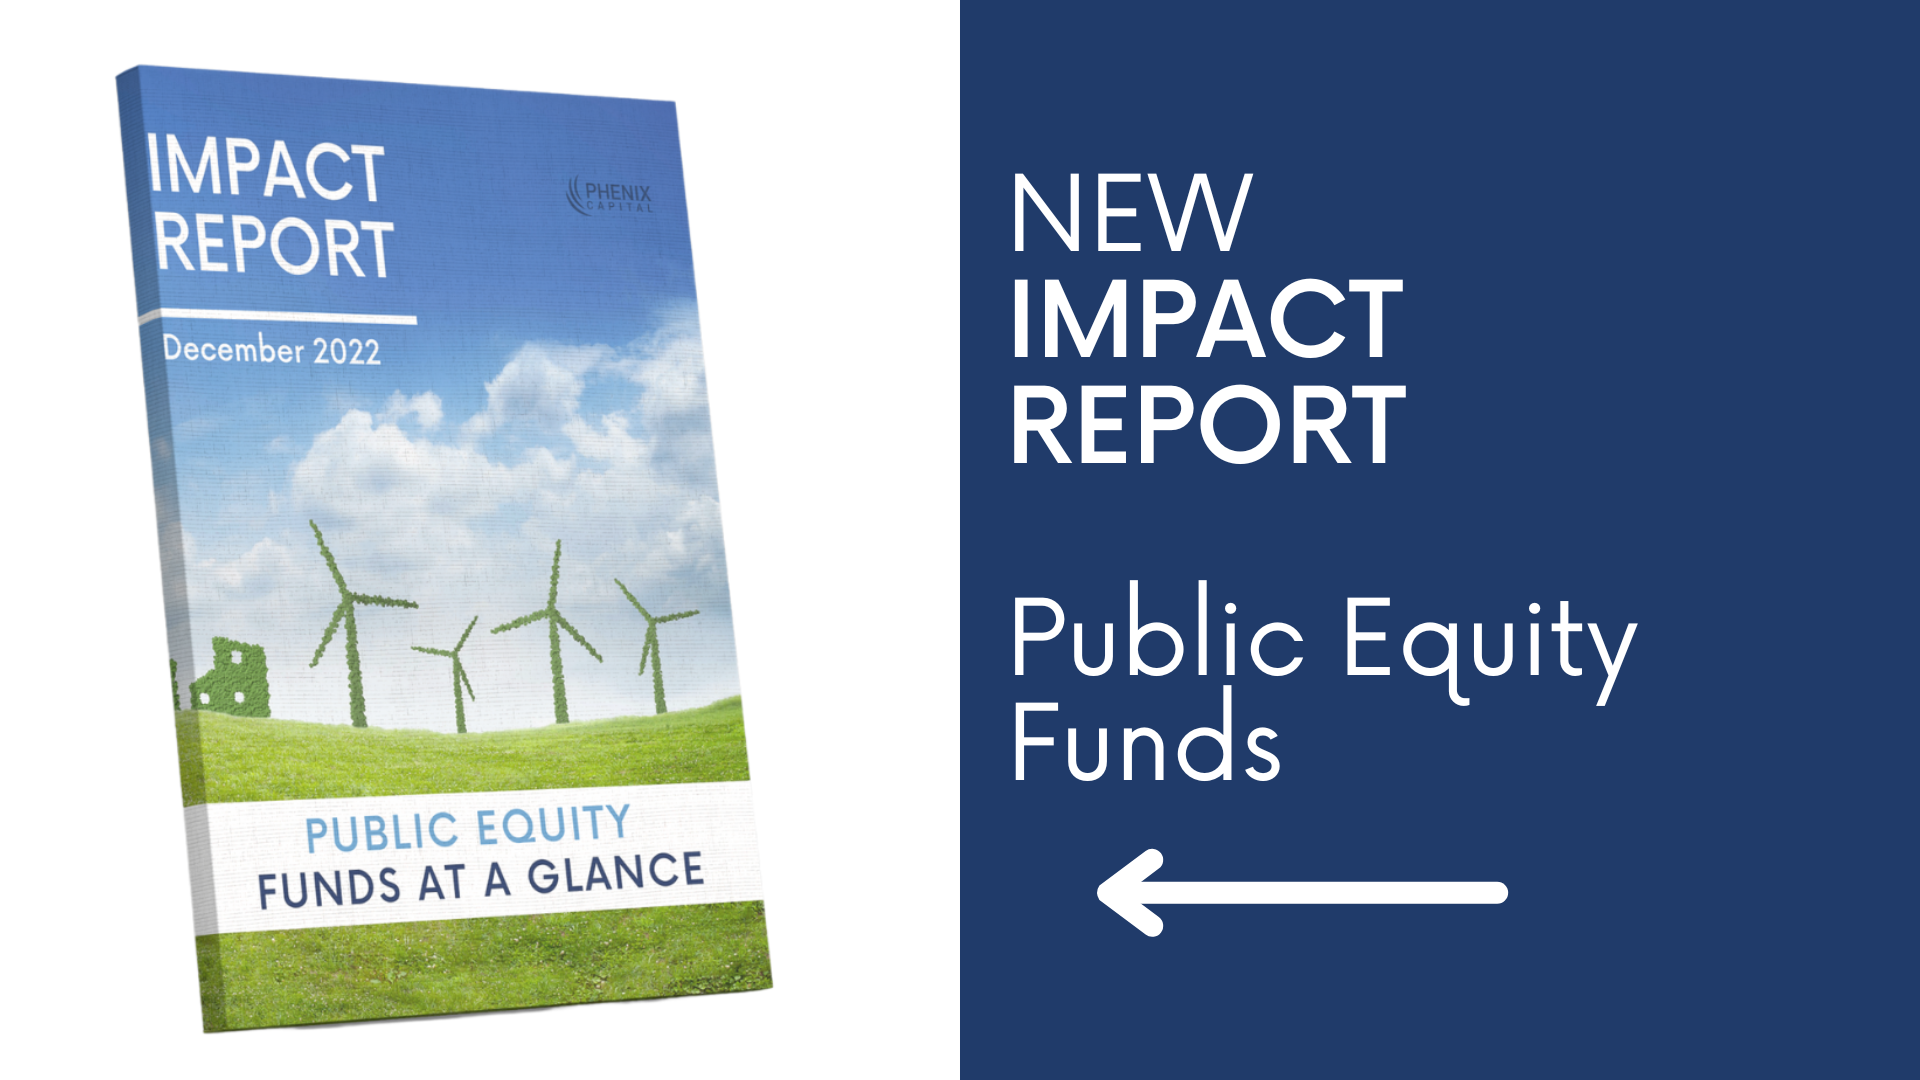 PRESS RELEASE: Impact report- public equity funds at a glance